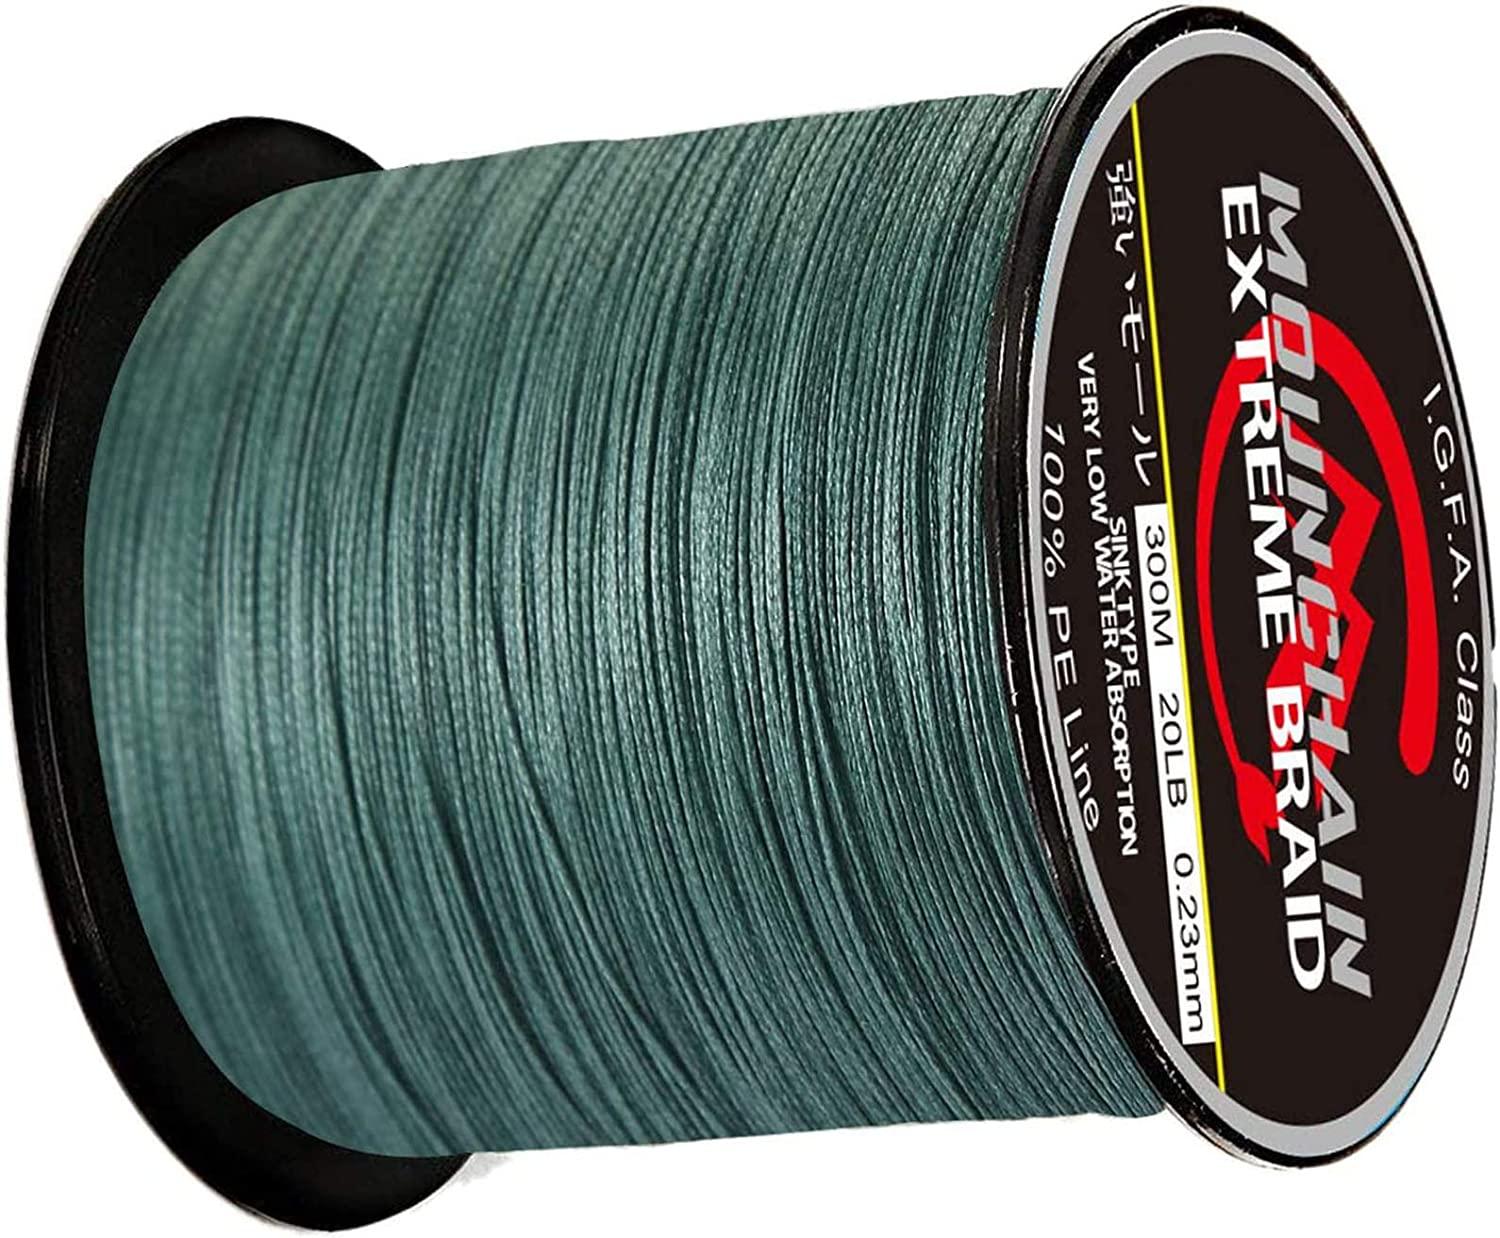 Fishing Wire 300M Super Strong 4 Braided Fishing Lines PE